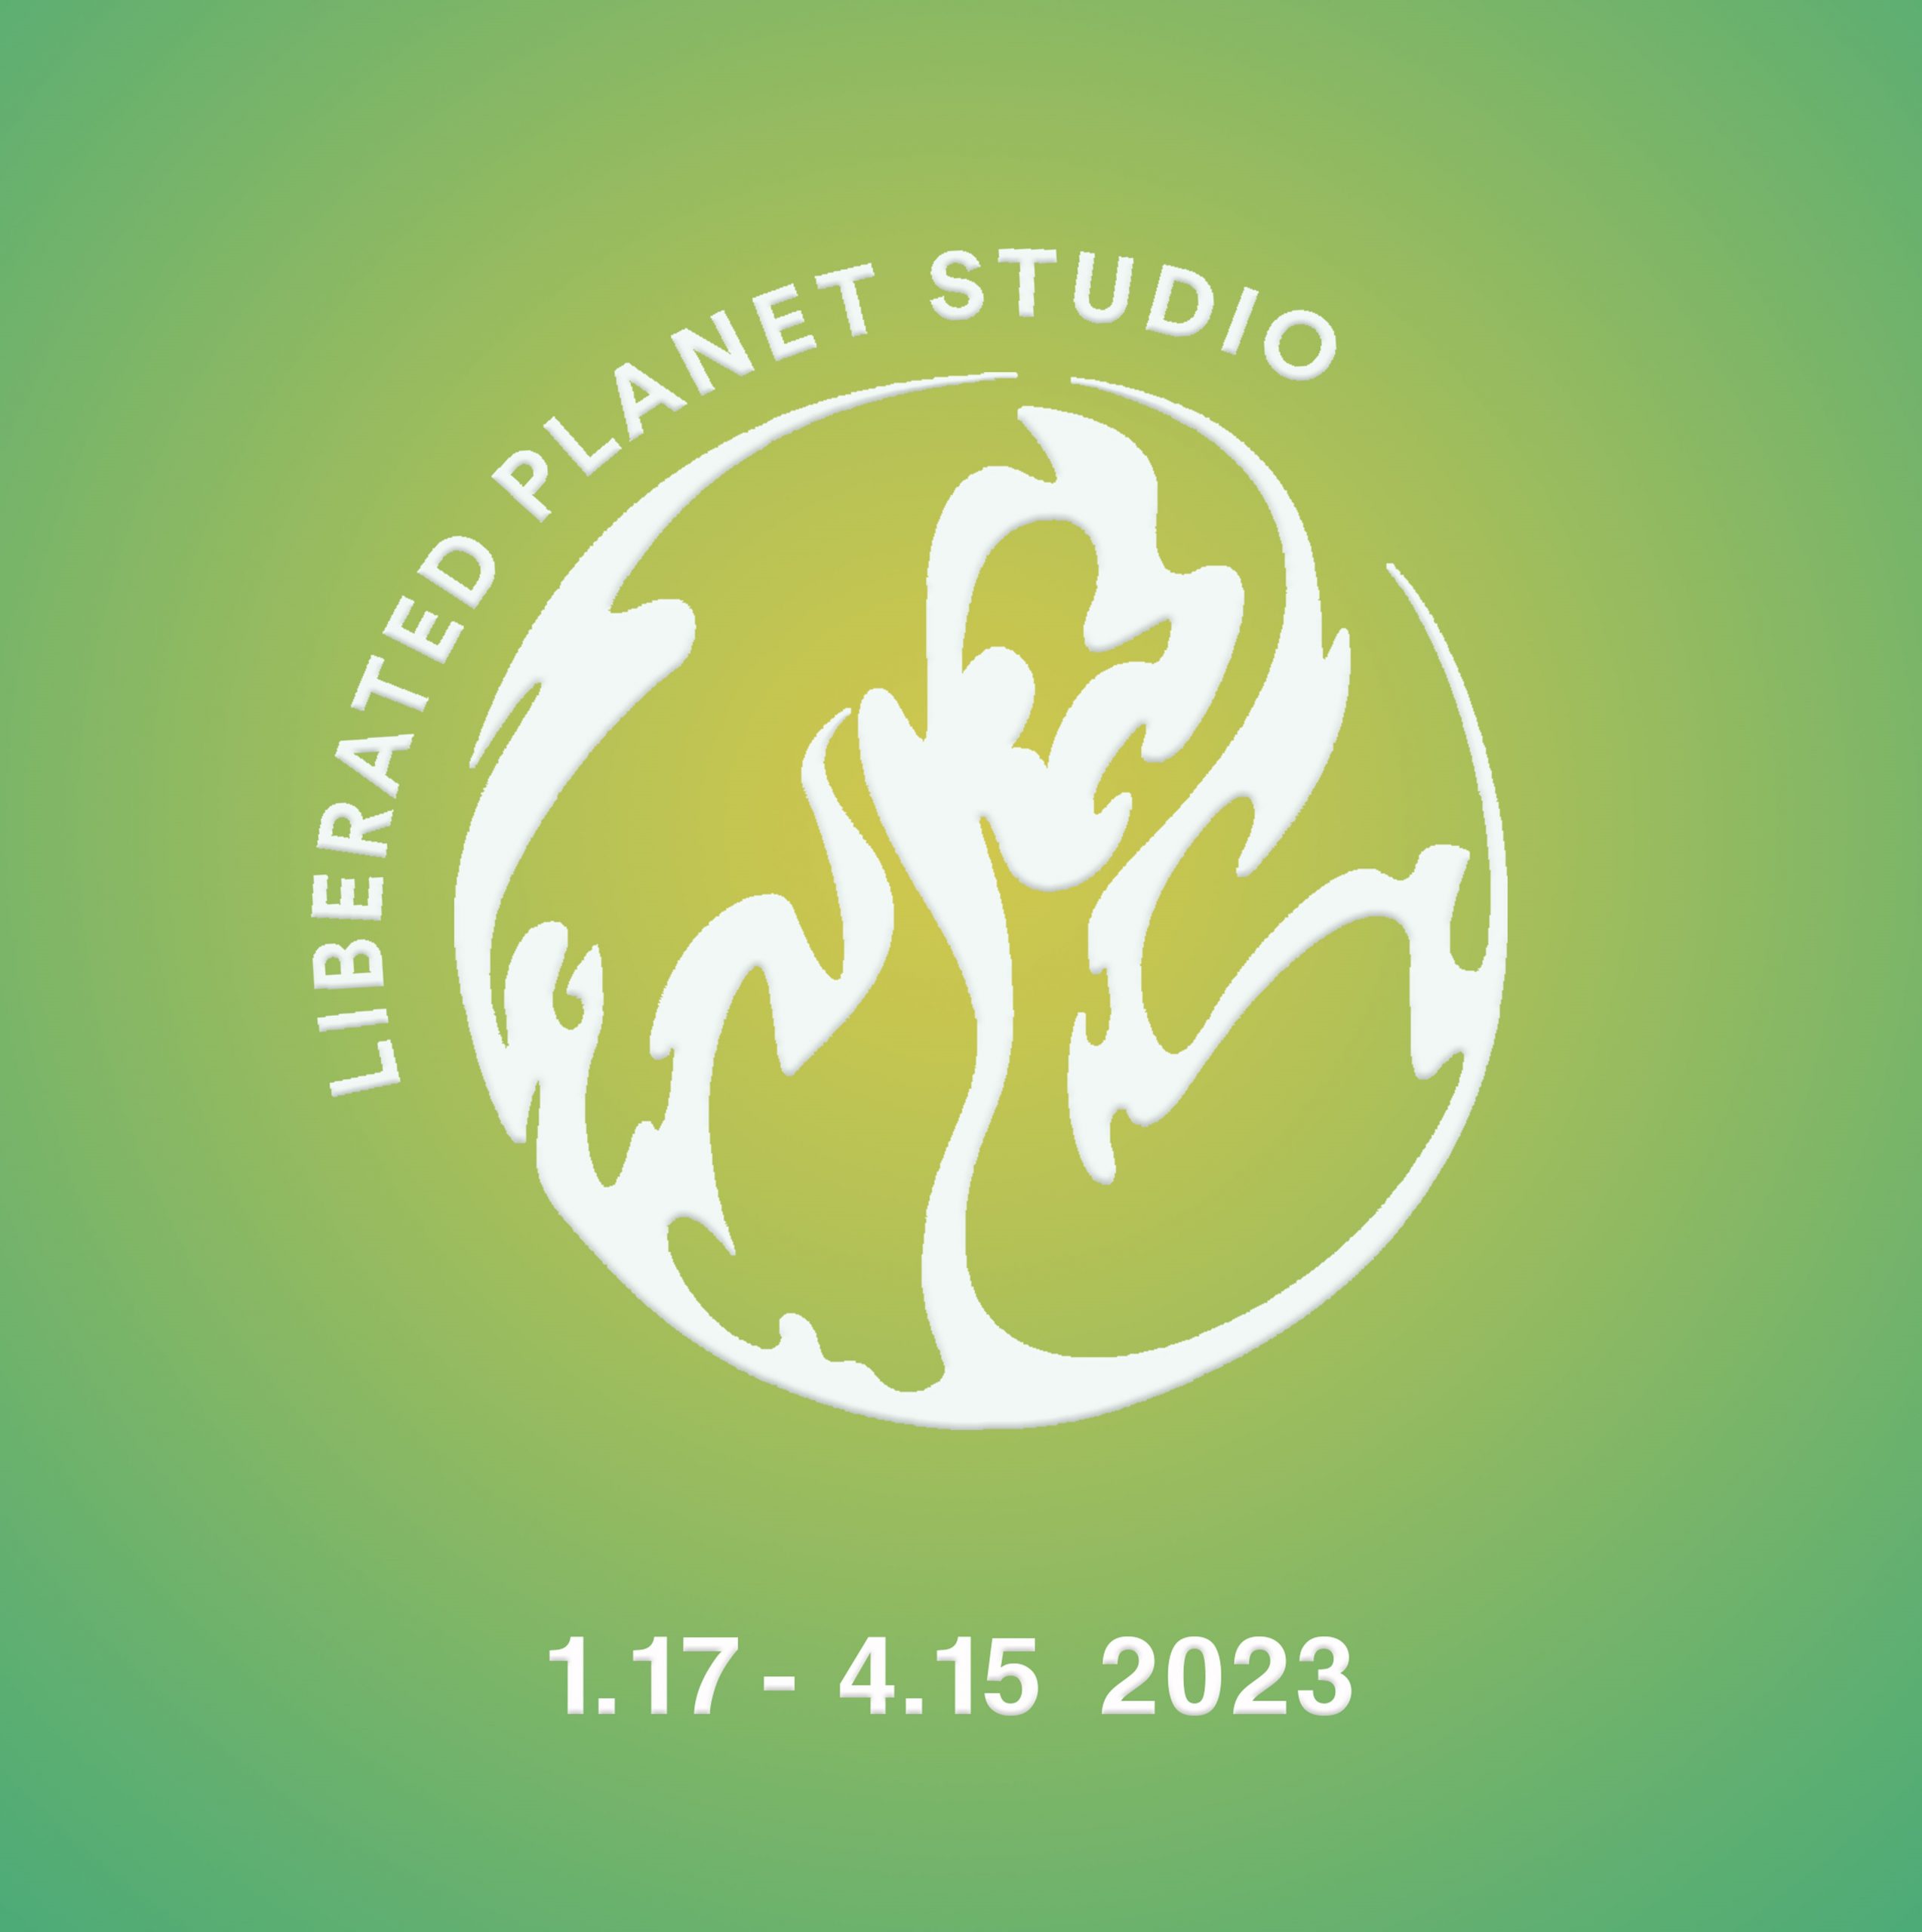 Logo for the Liberated Planet Studio with the dates 1.17 - 4.15 2023 at the bottom.